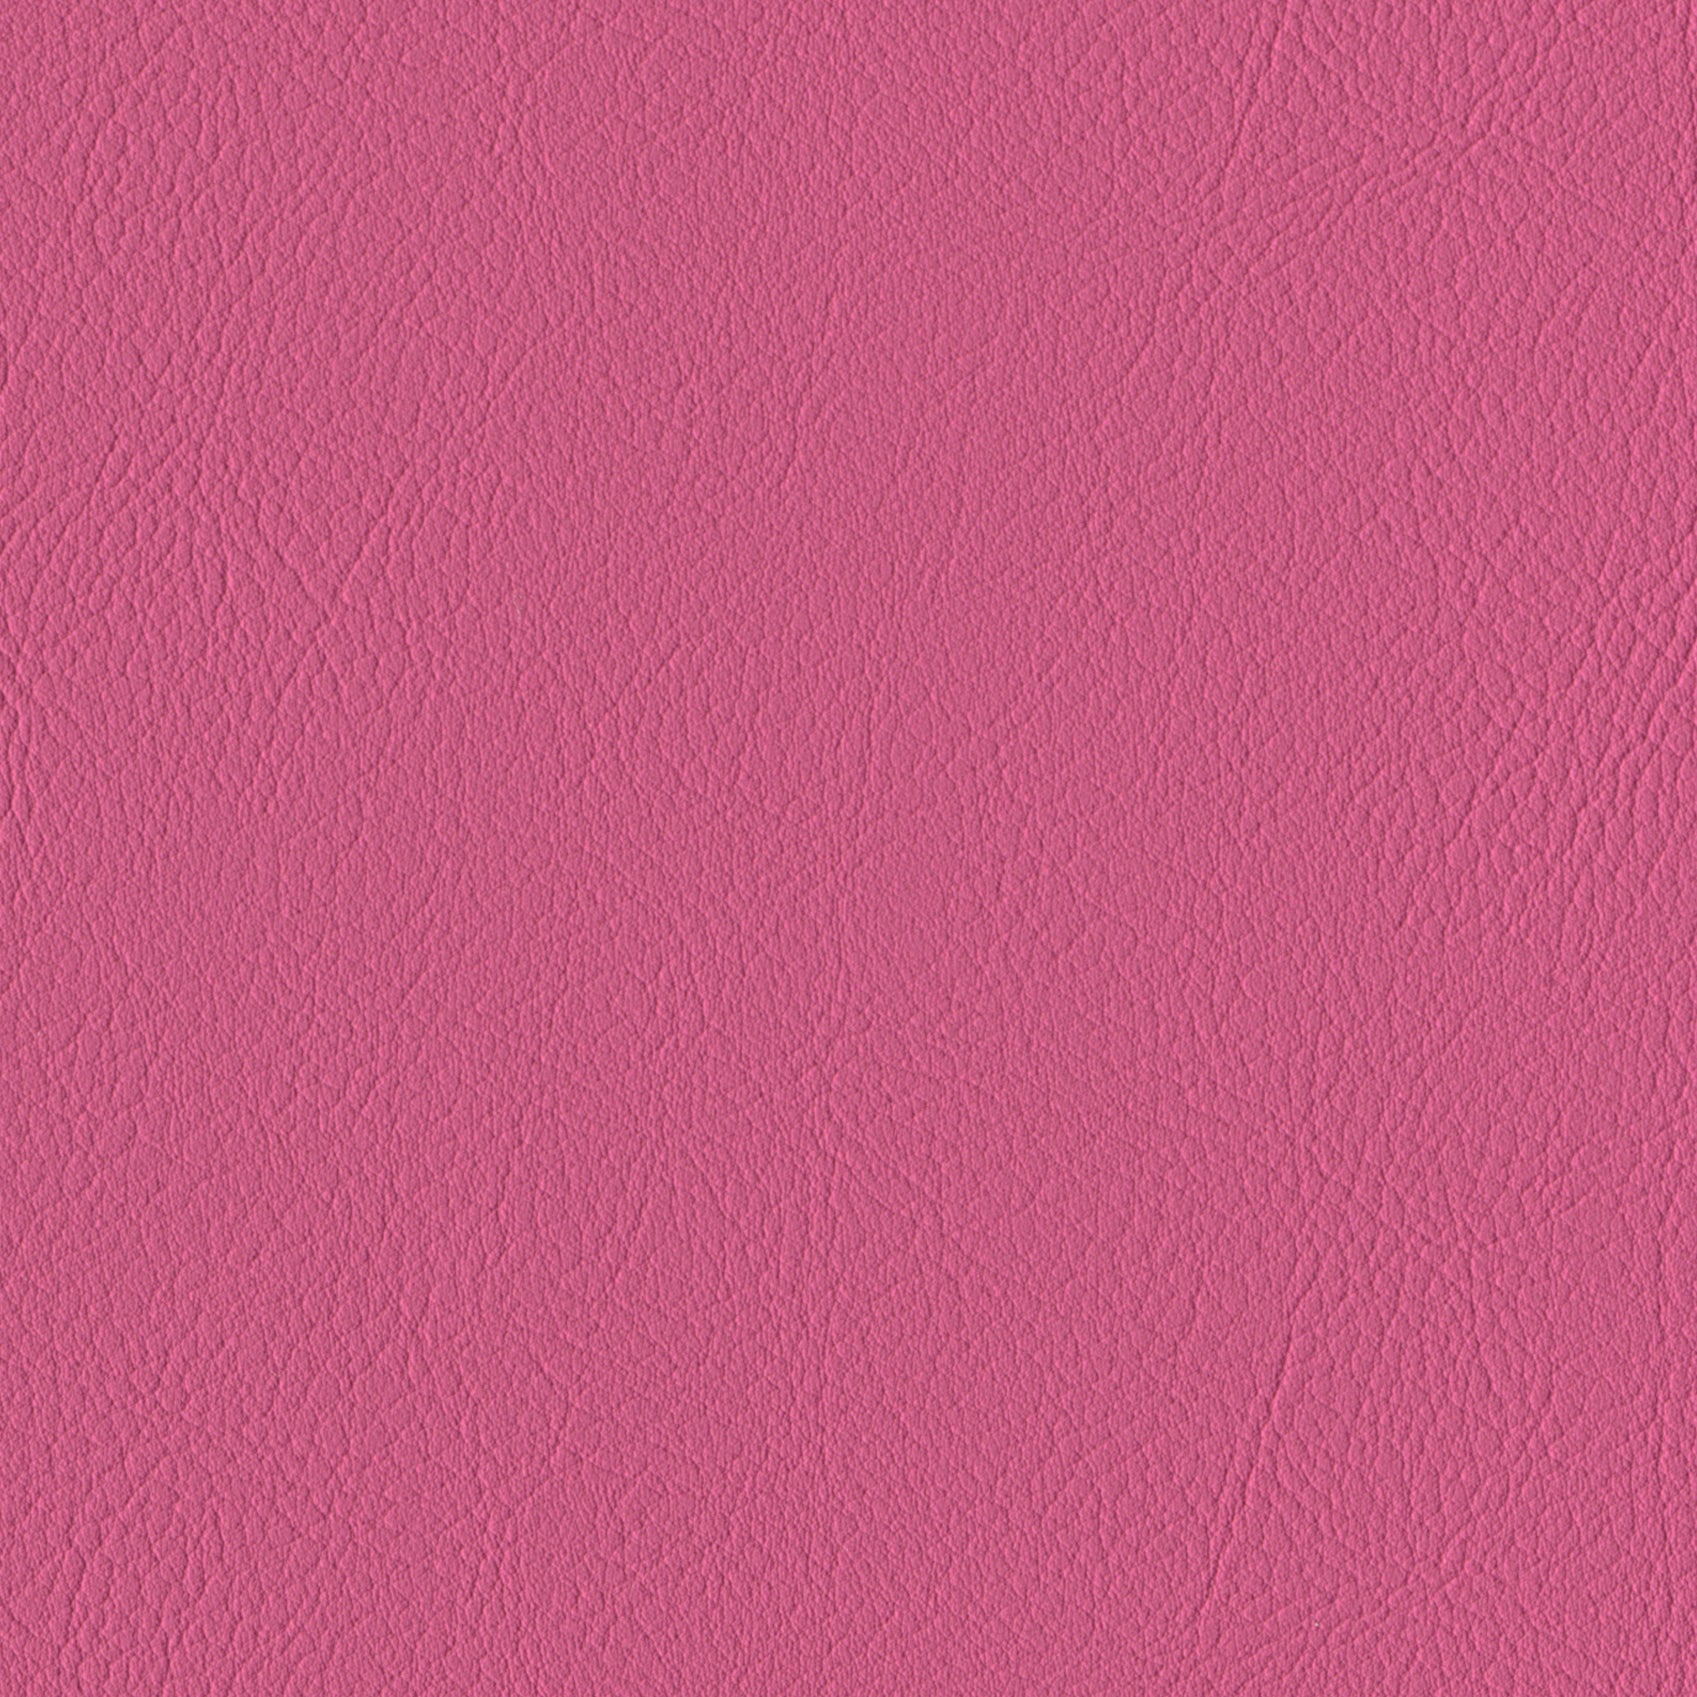    Andriali-Contract-Vinyl_Upholstery-Design-LegacyFR-Color-206Fusia-Width-140cm